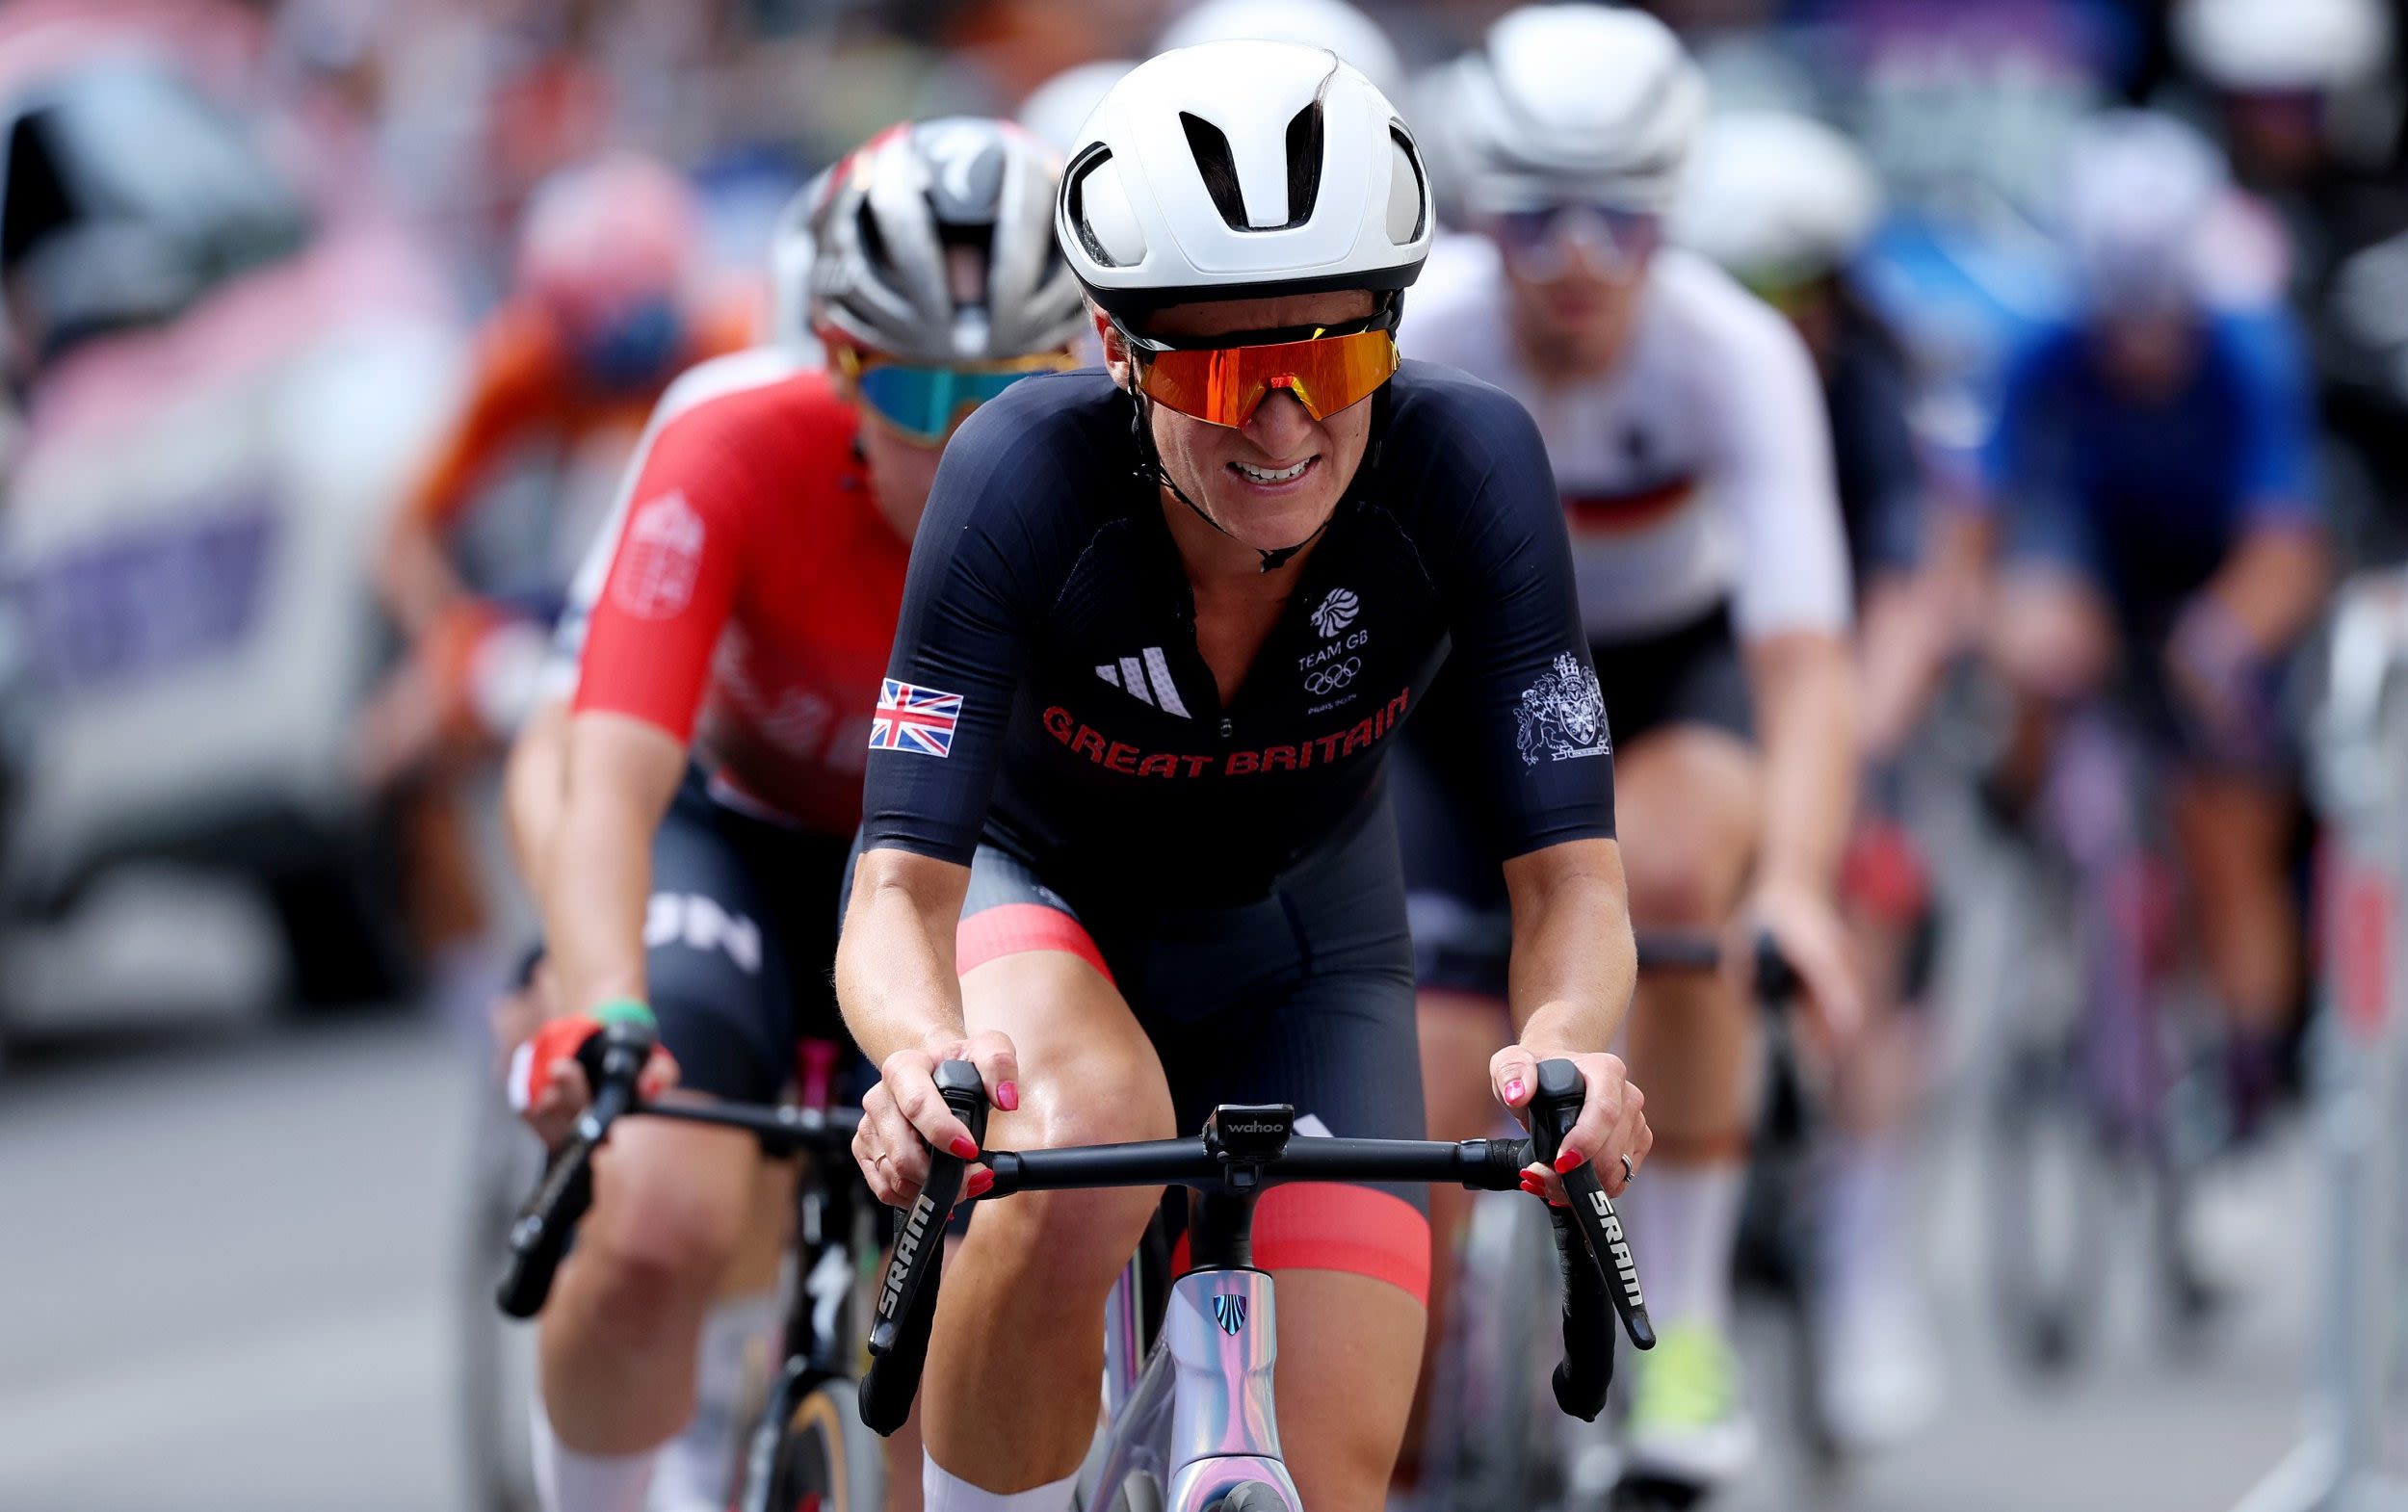 Lizzie Deignan’s Olympic career ends 10 days after ‘medical emergency’ hospitalisation